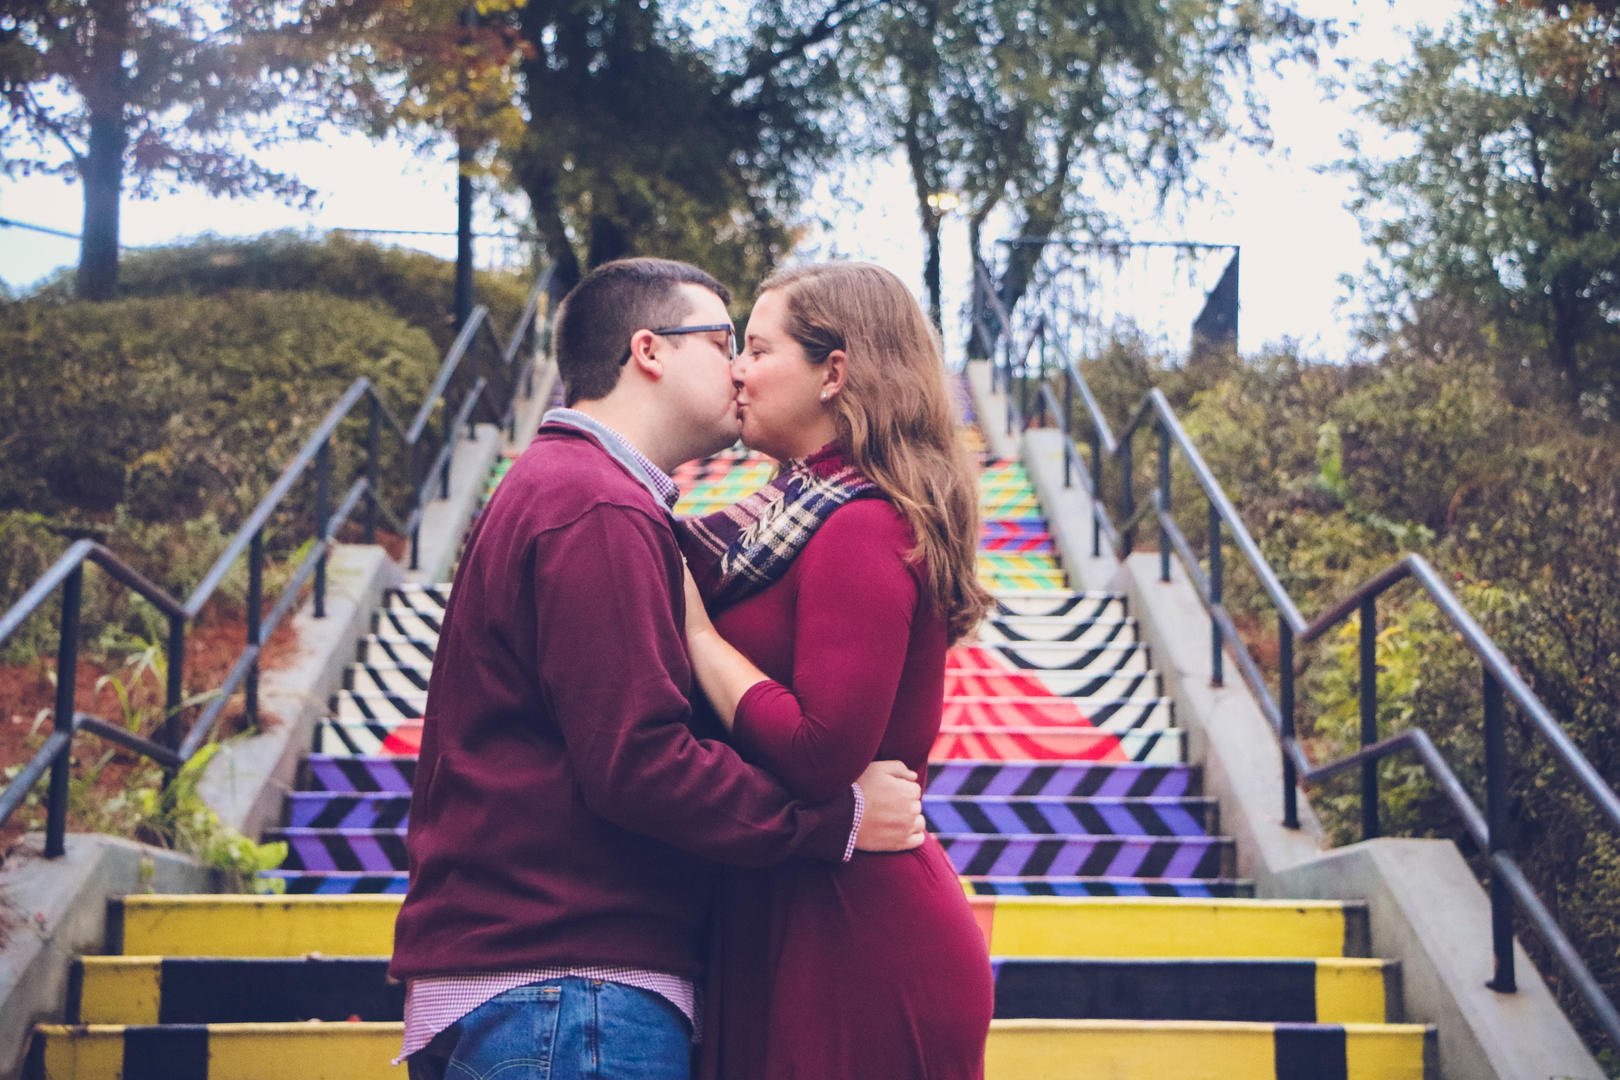 Haleigh and Sean kissing in front of a flight of stairs that have been painted with artistic patterns
